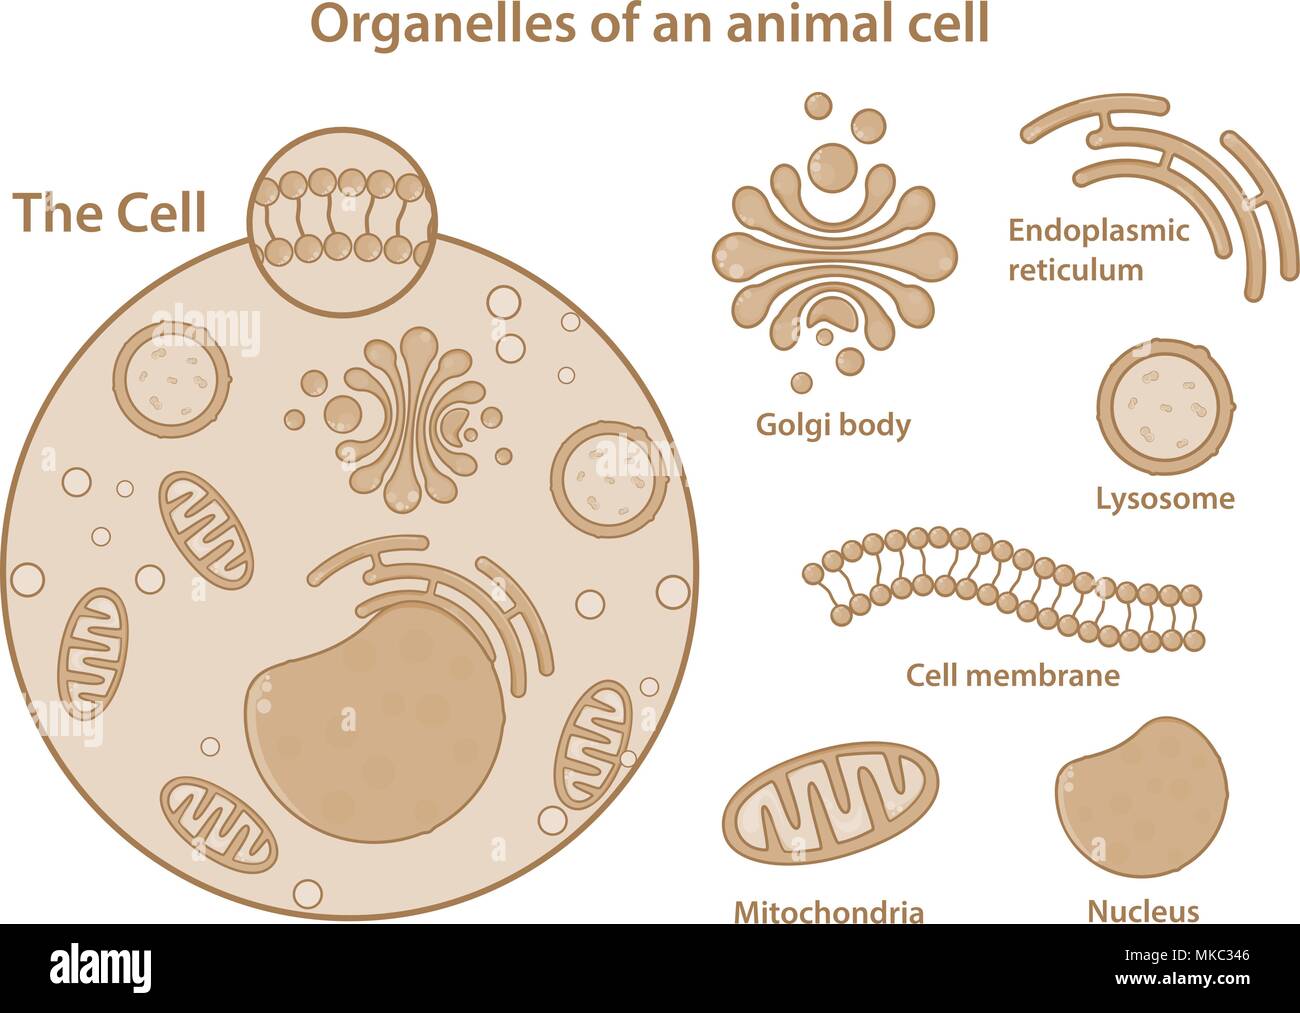 Organelles and major components of an animal cell. Stock Vector